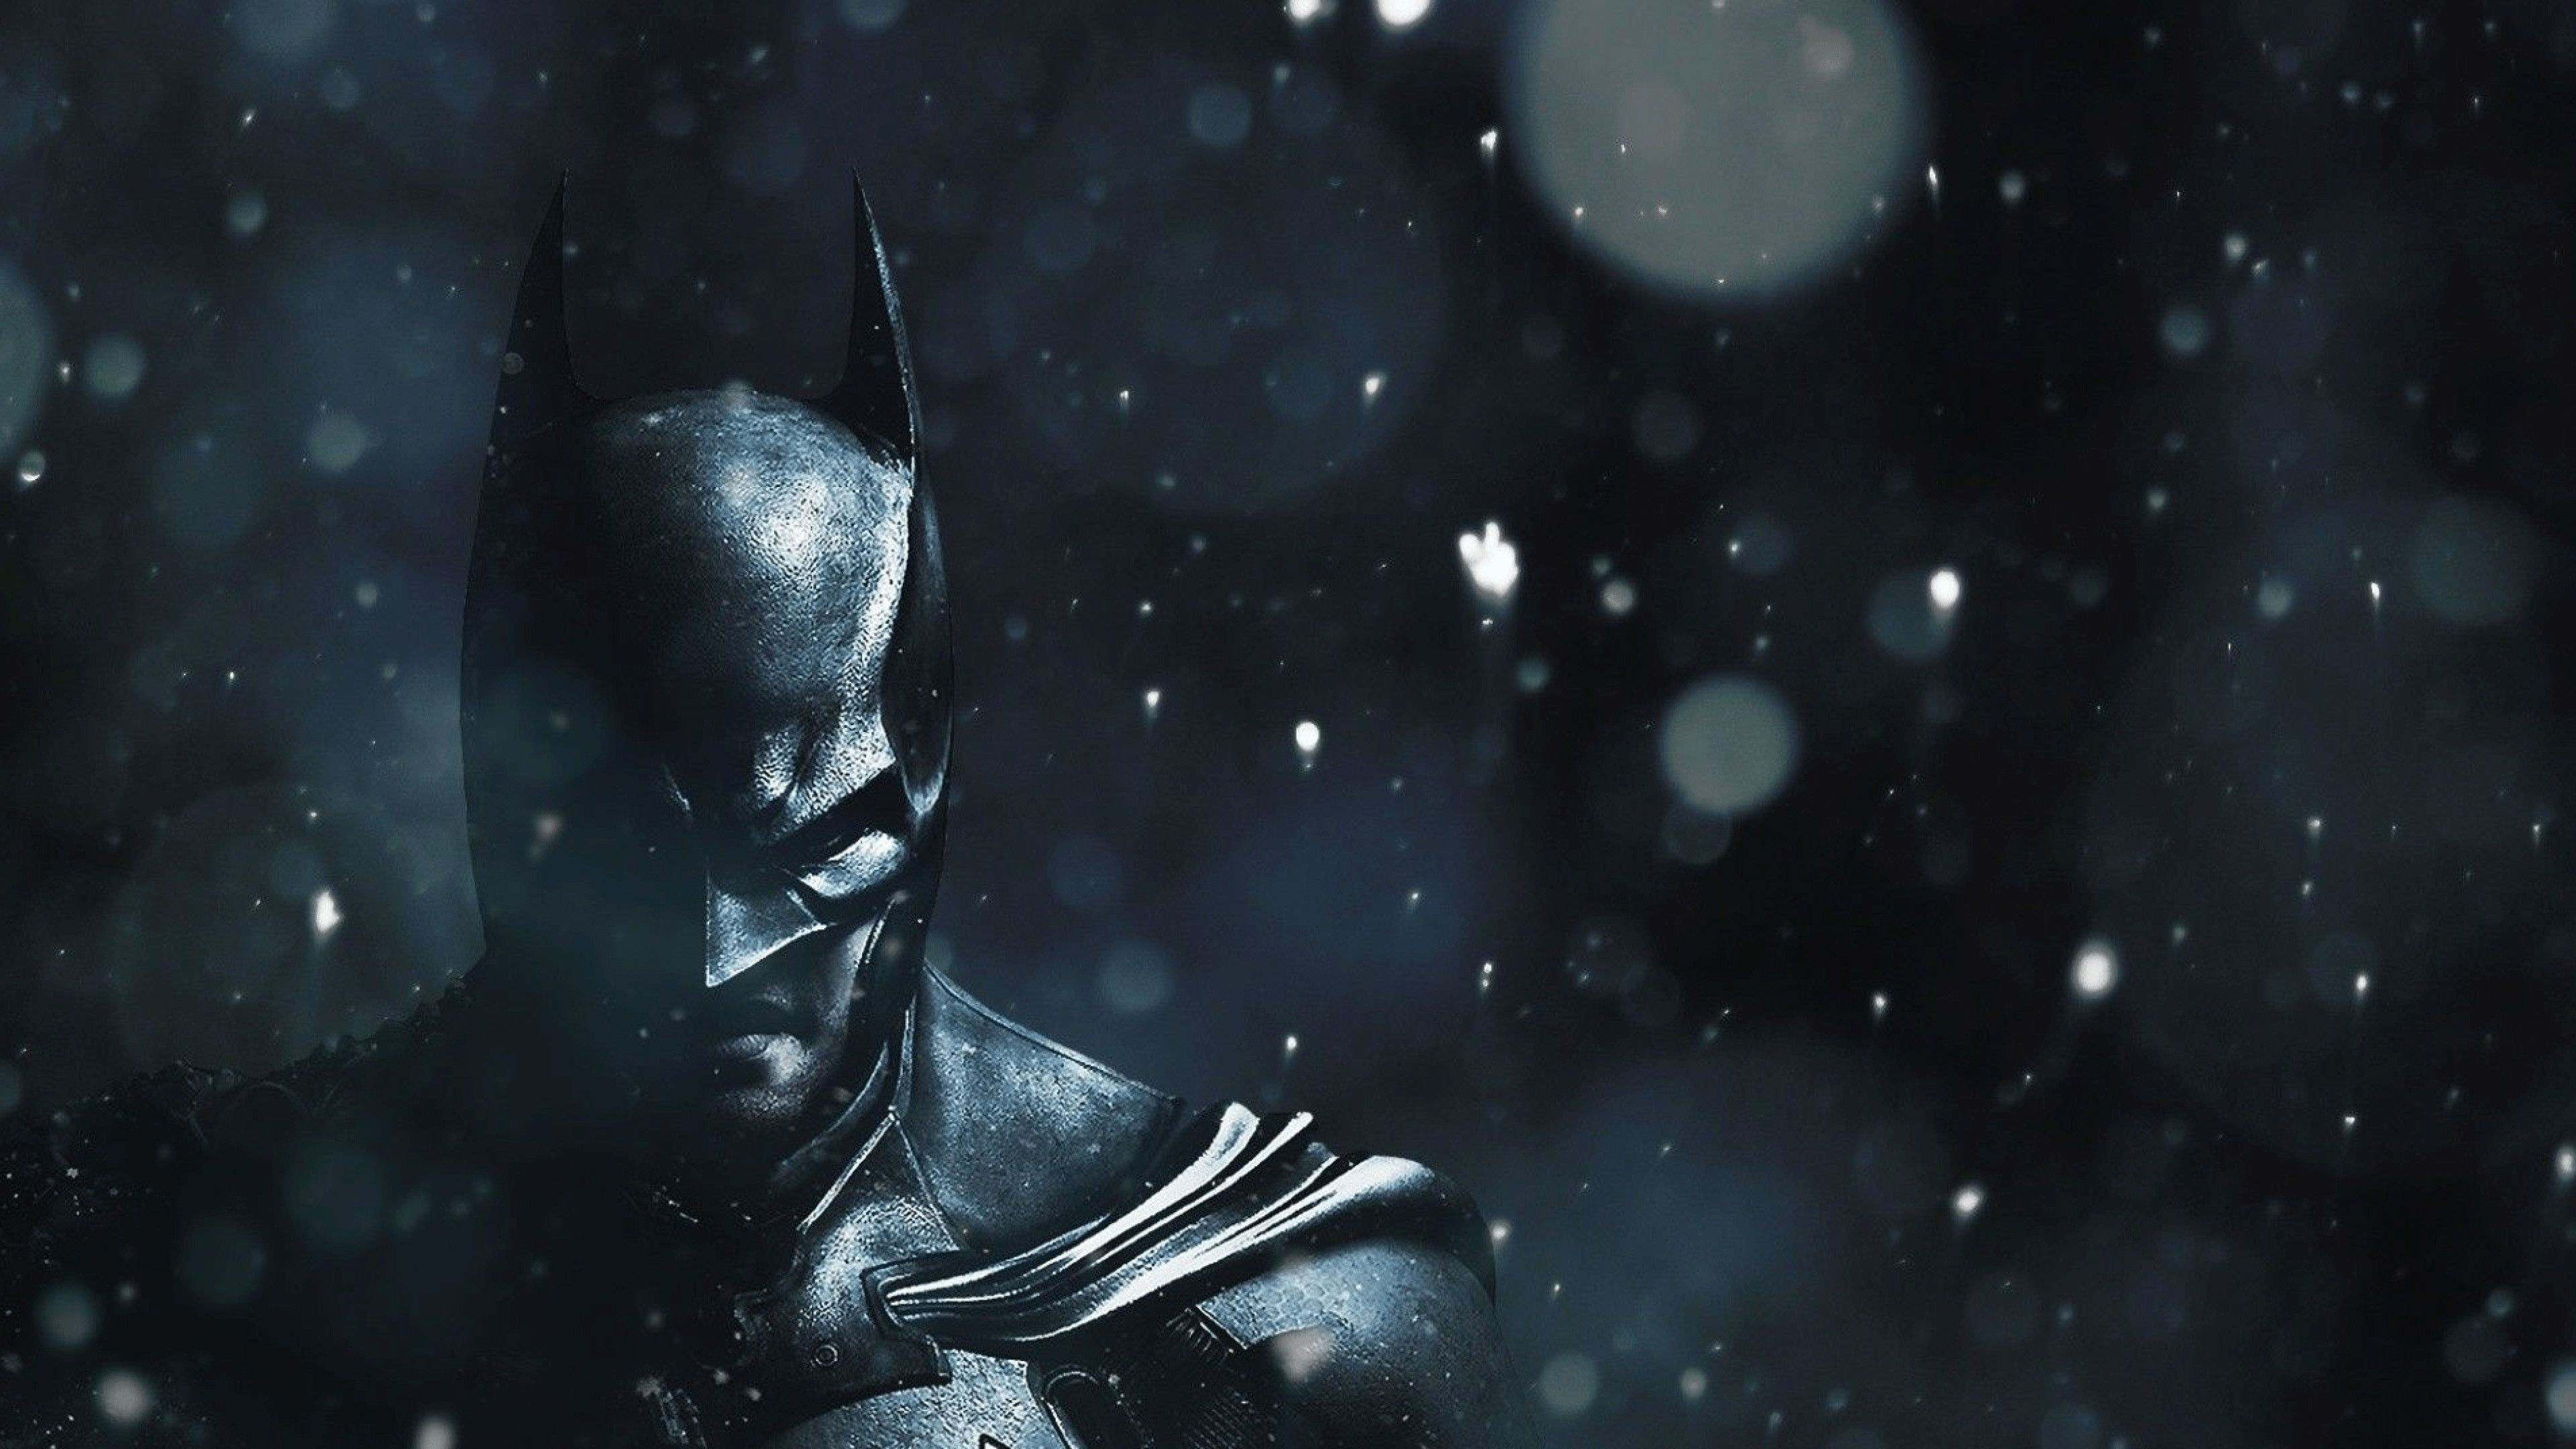 Collection of Batman Pc Wallpaper on HDWallpaper Batman Wallpaper Wallpaper). Dc comics wallpaper, Batman wallpaper, Batman